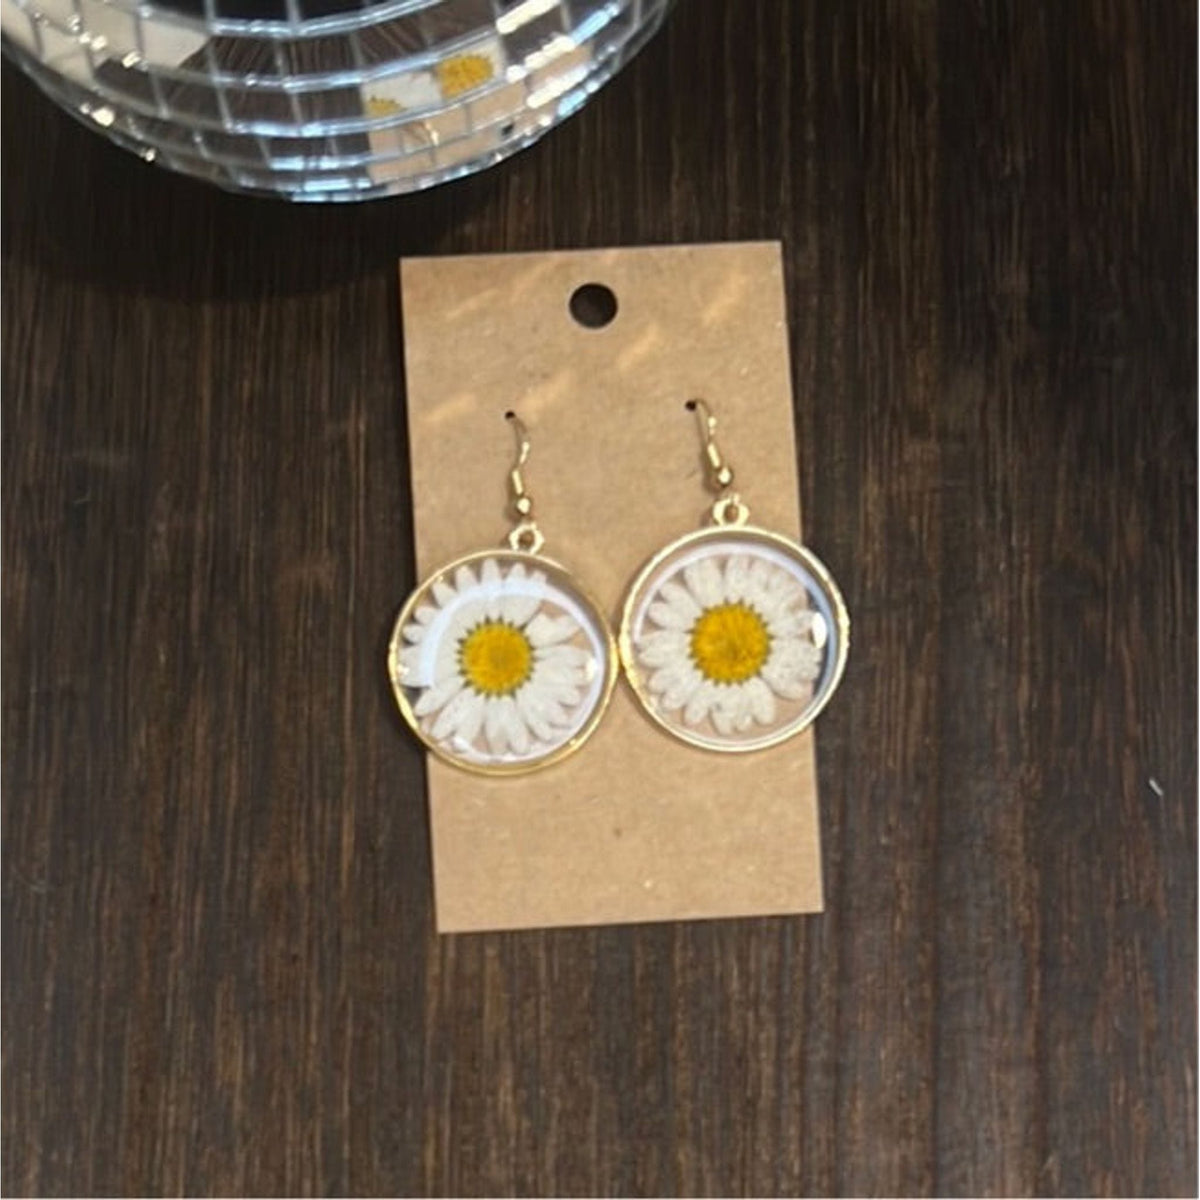 Daisy Pressed Flower Earrings Earrings TheFringeCultureCollective